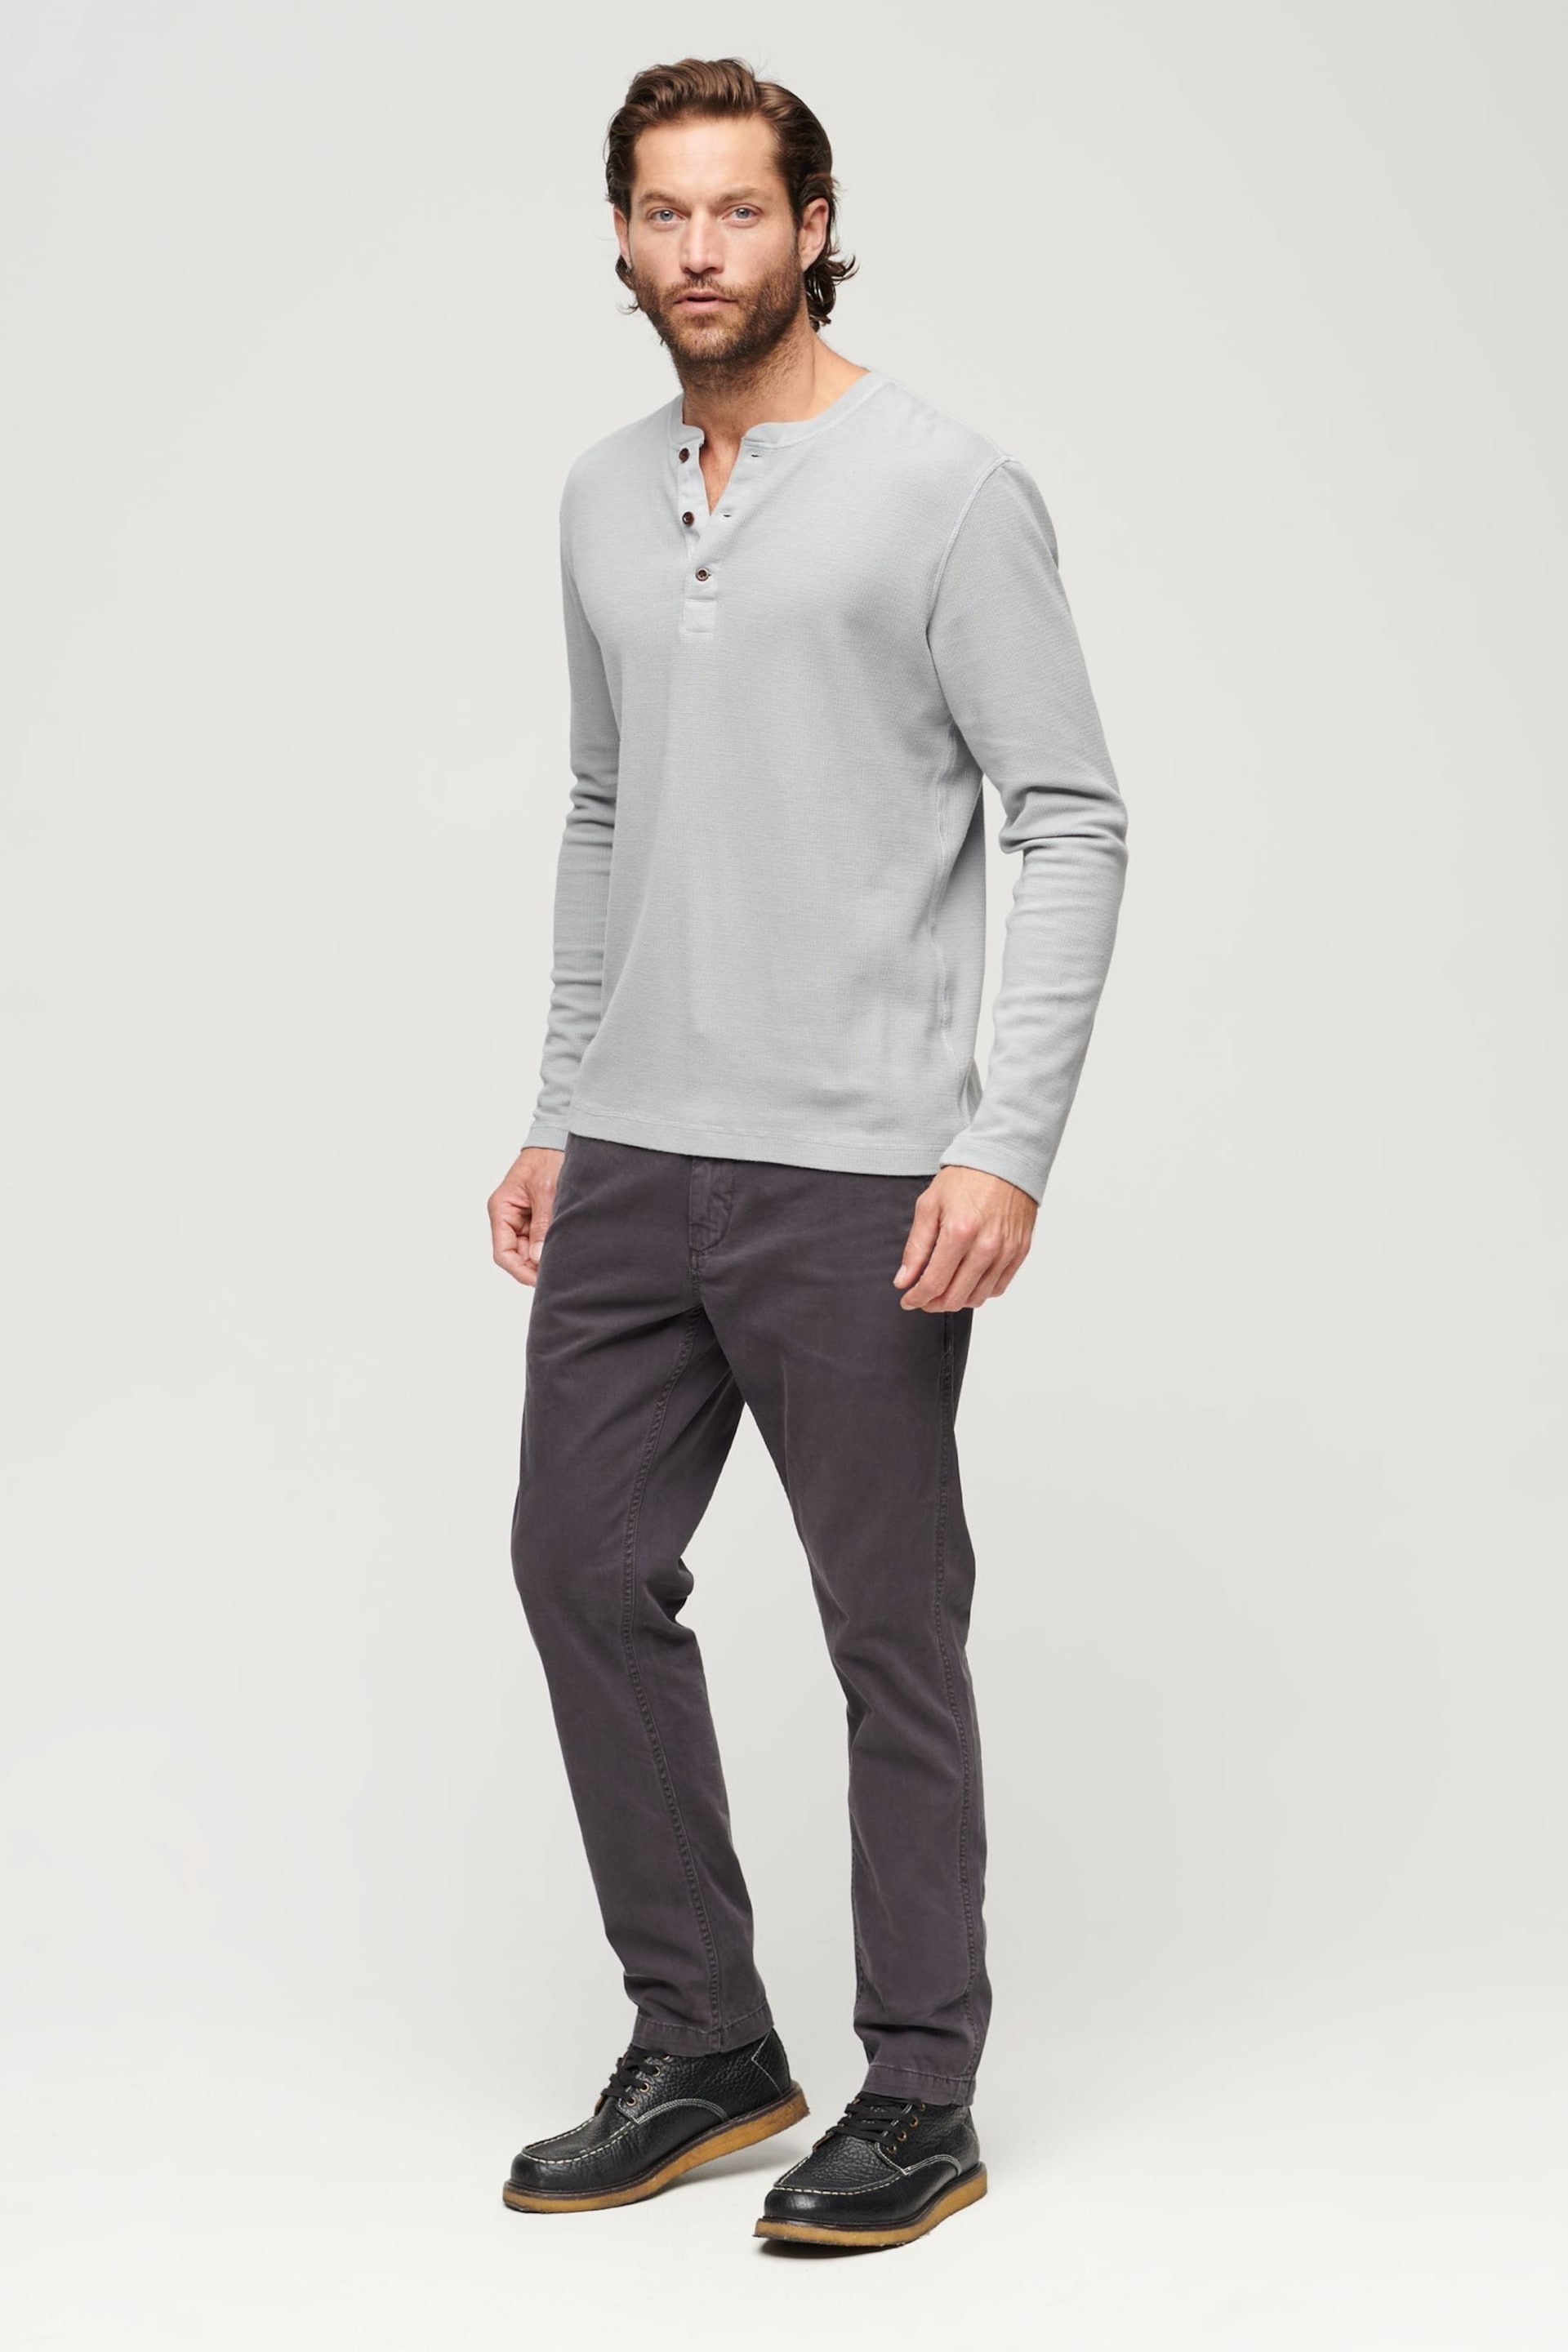 Superdry Grey Slim Officers Chinos Trousers - Image 3 of 7